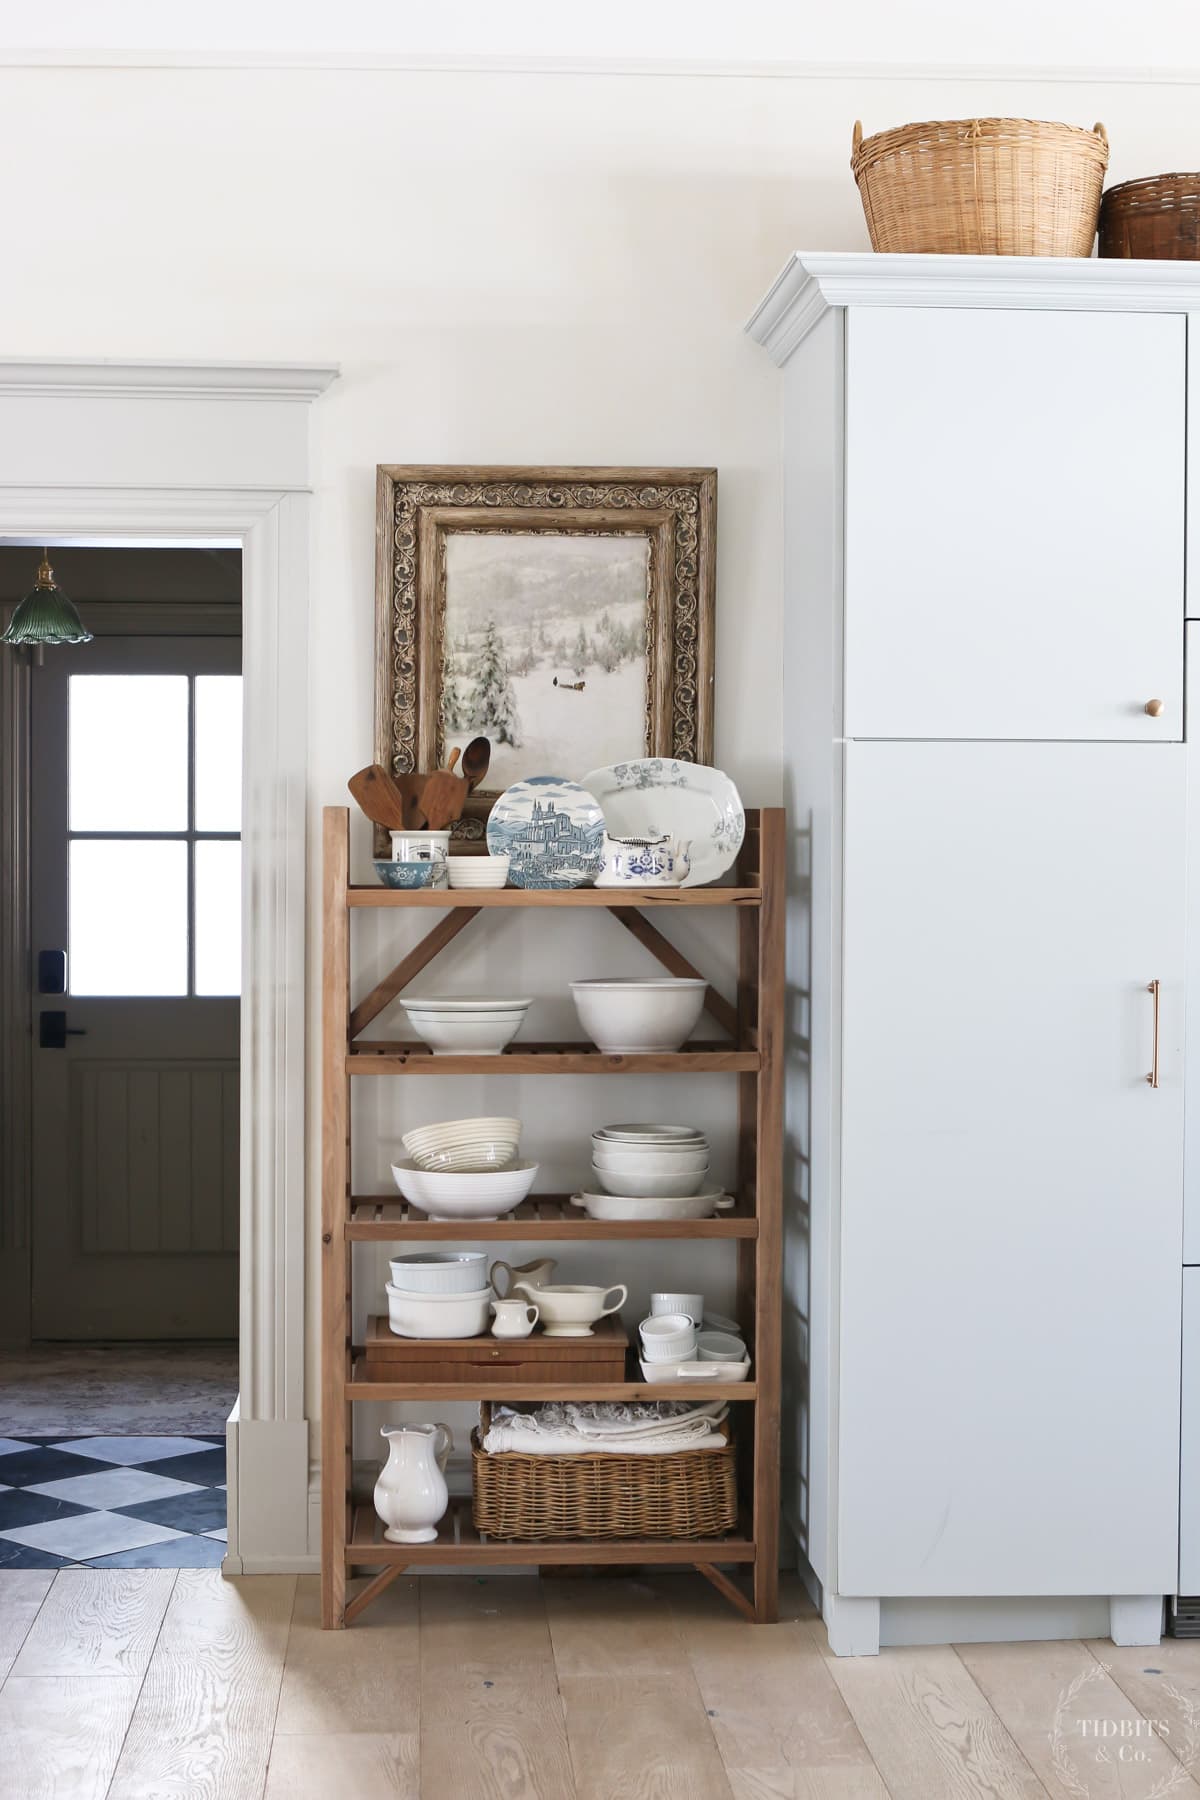 A baker's rack holds blue and white dishes below an piece of vintage art